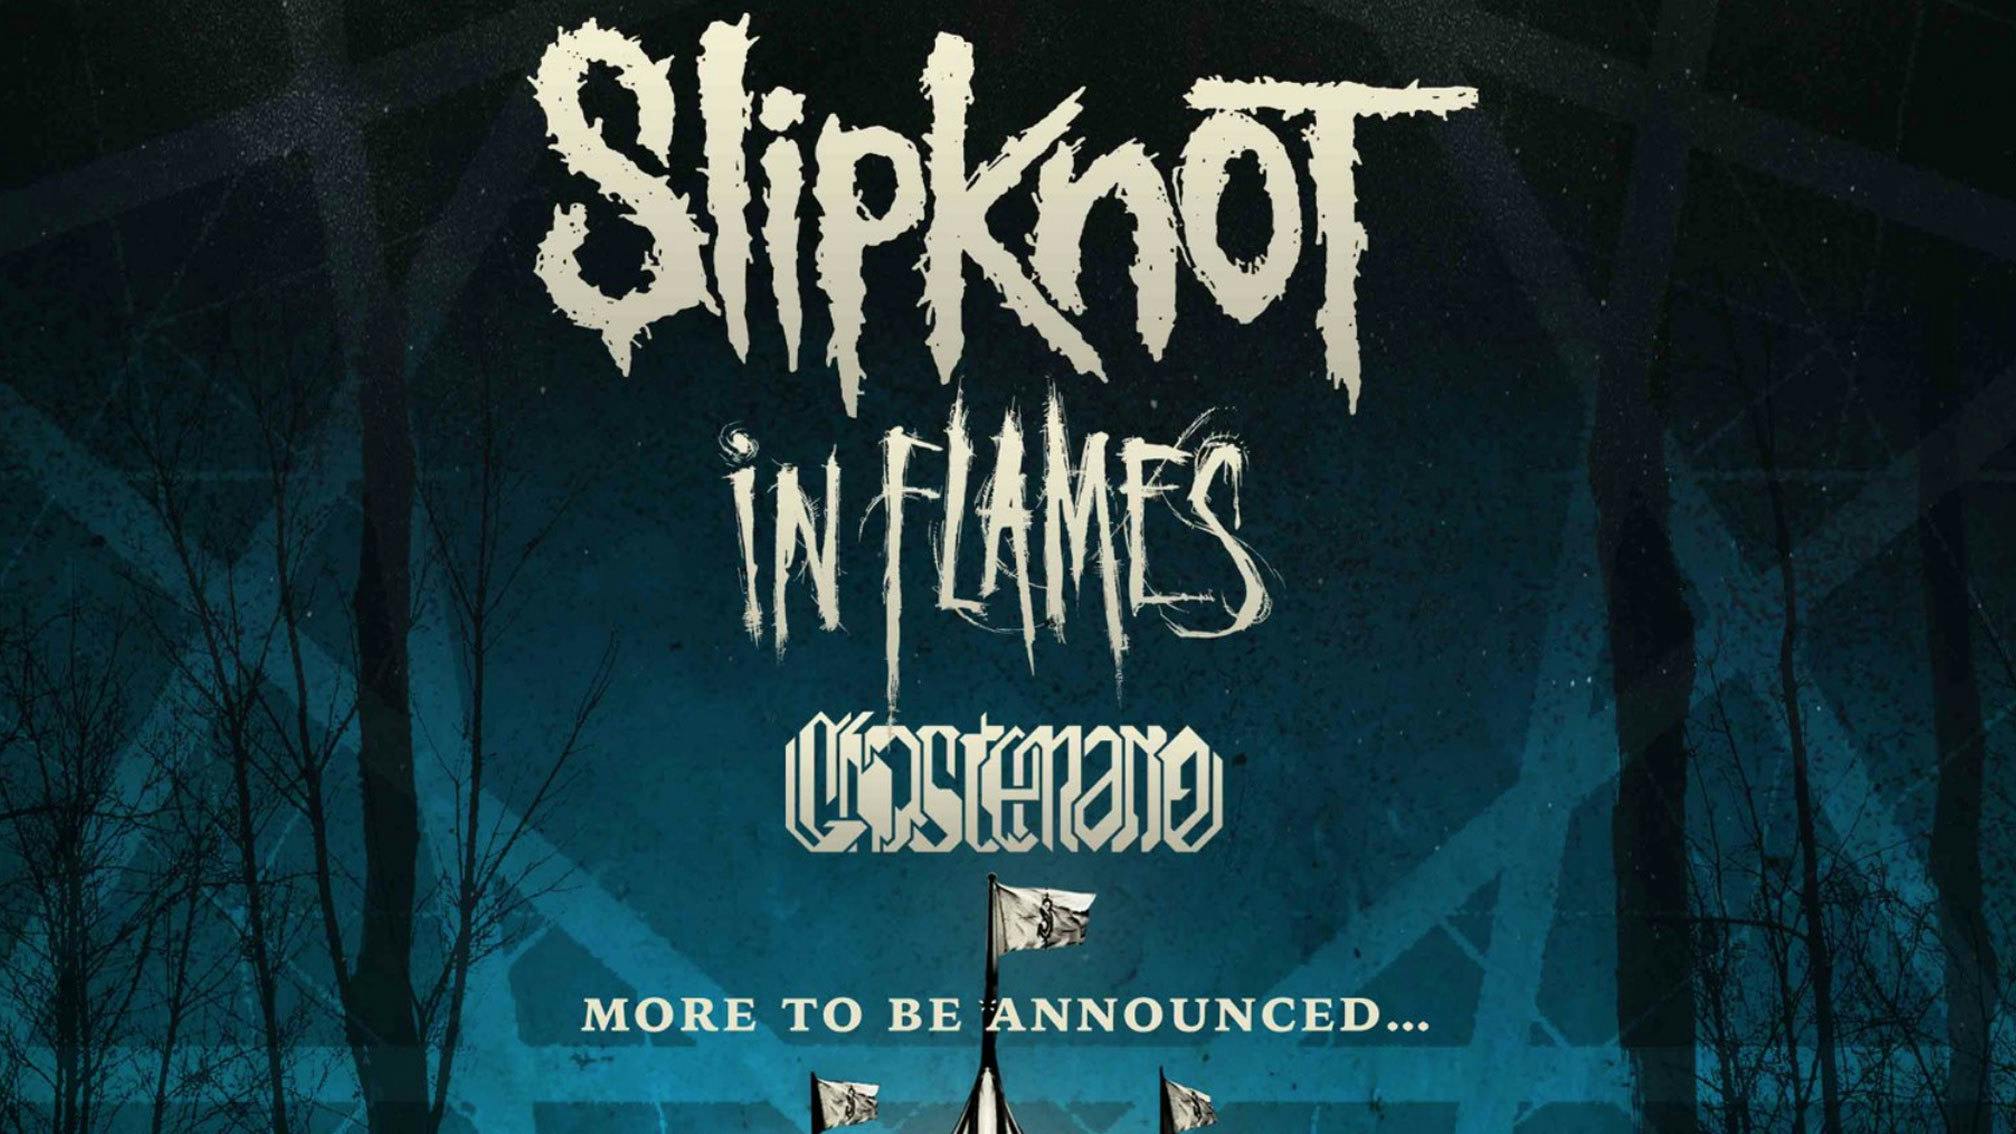 Slipknot, In Flames and Ghostemane for Knotfest Germany 2022